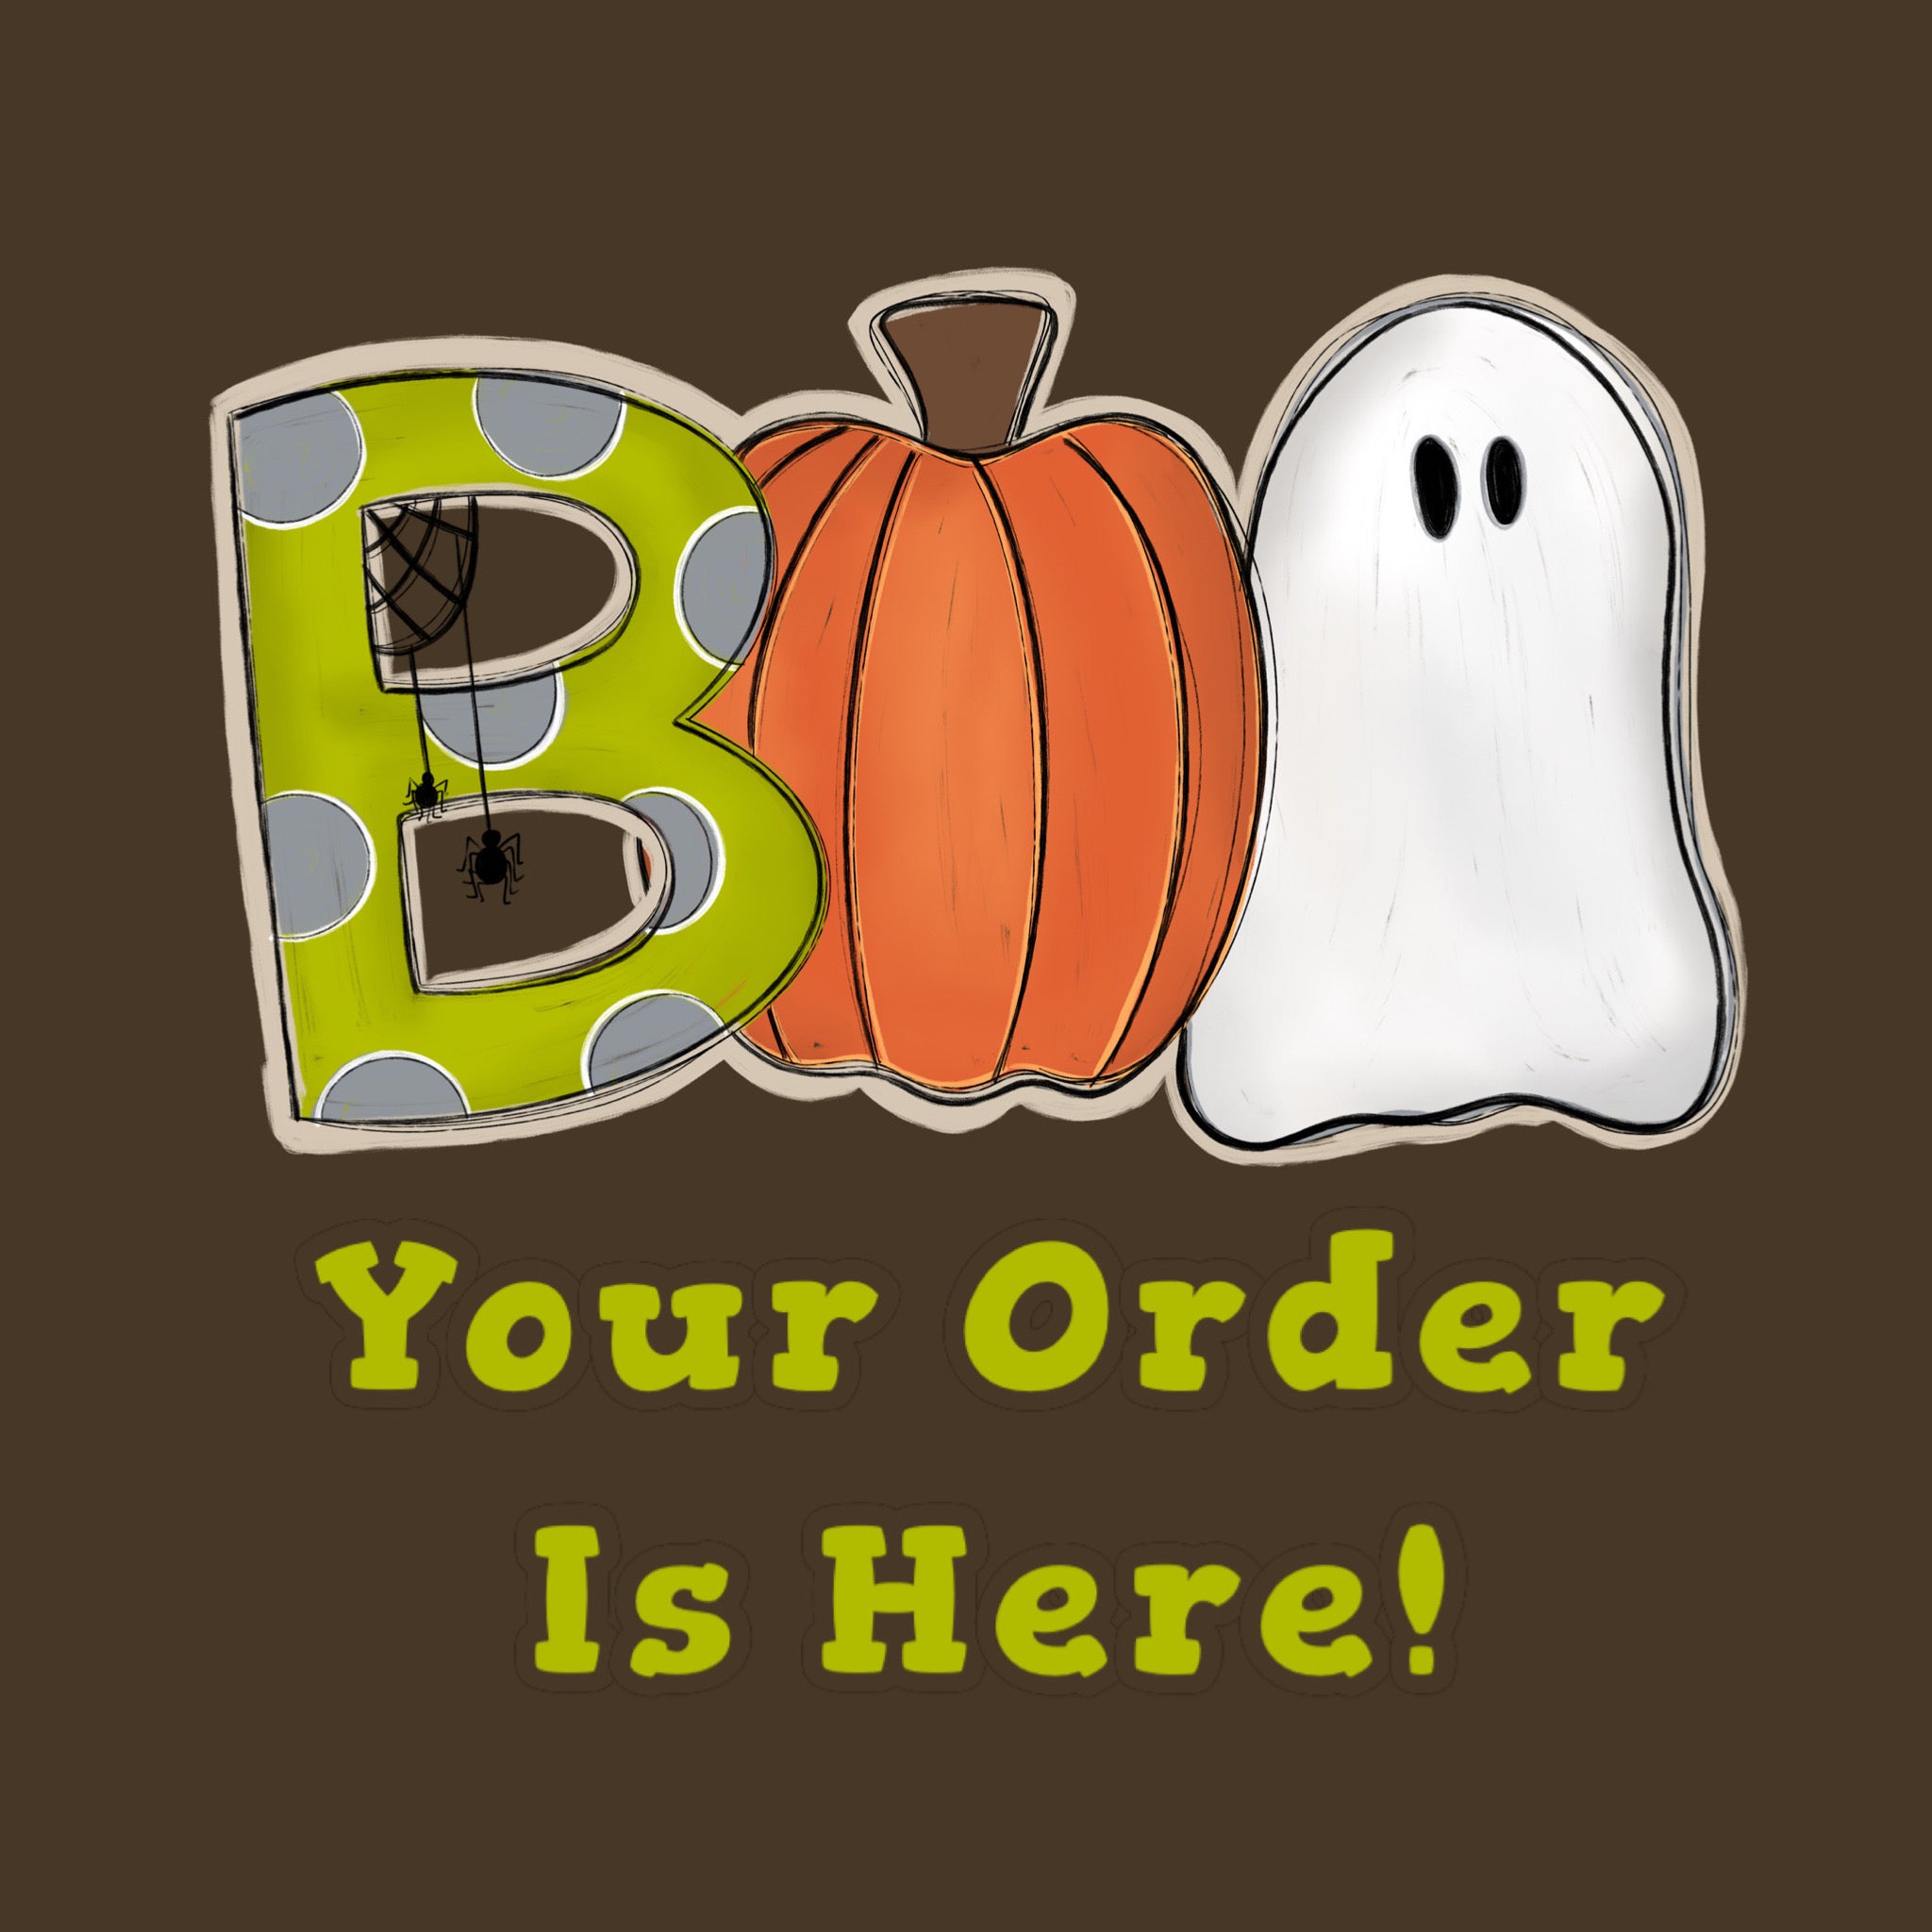 TGD Exclusive! BOO! Your Order is Here! Halloween Ghost 2x2 Square Stickers, 25 stickers per pack